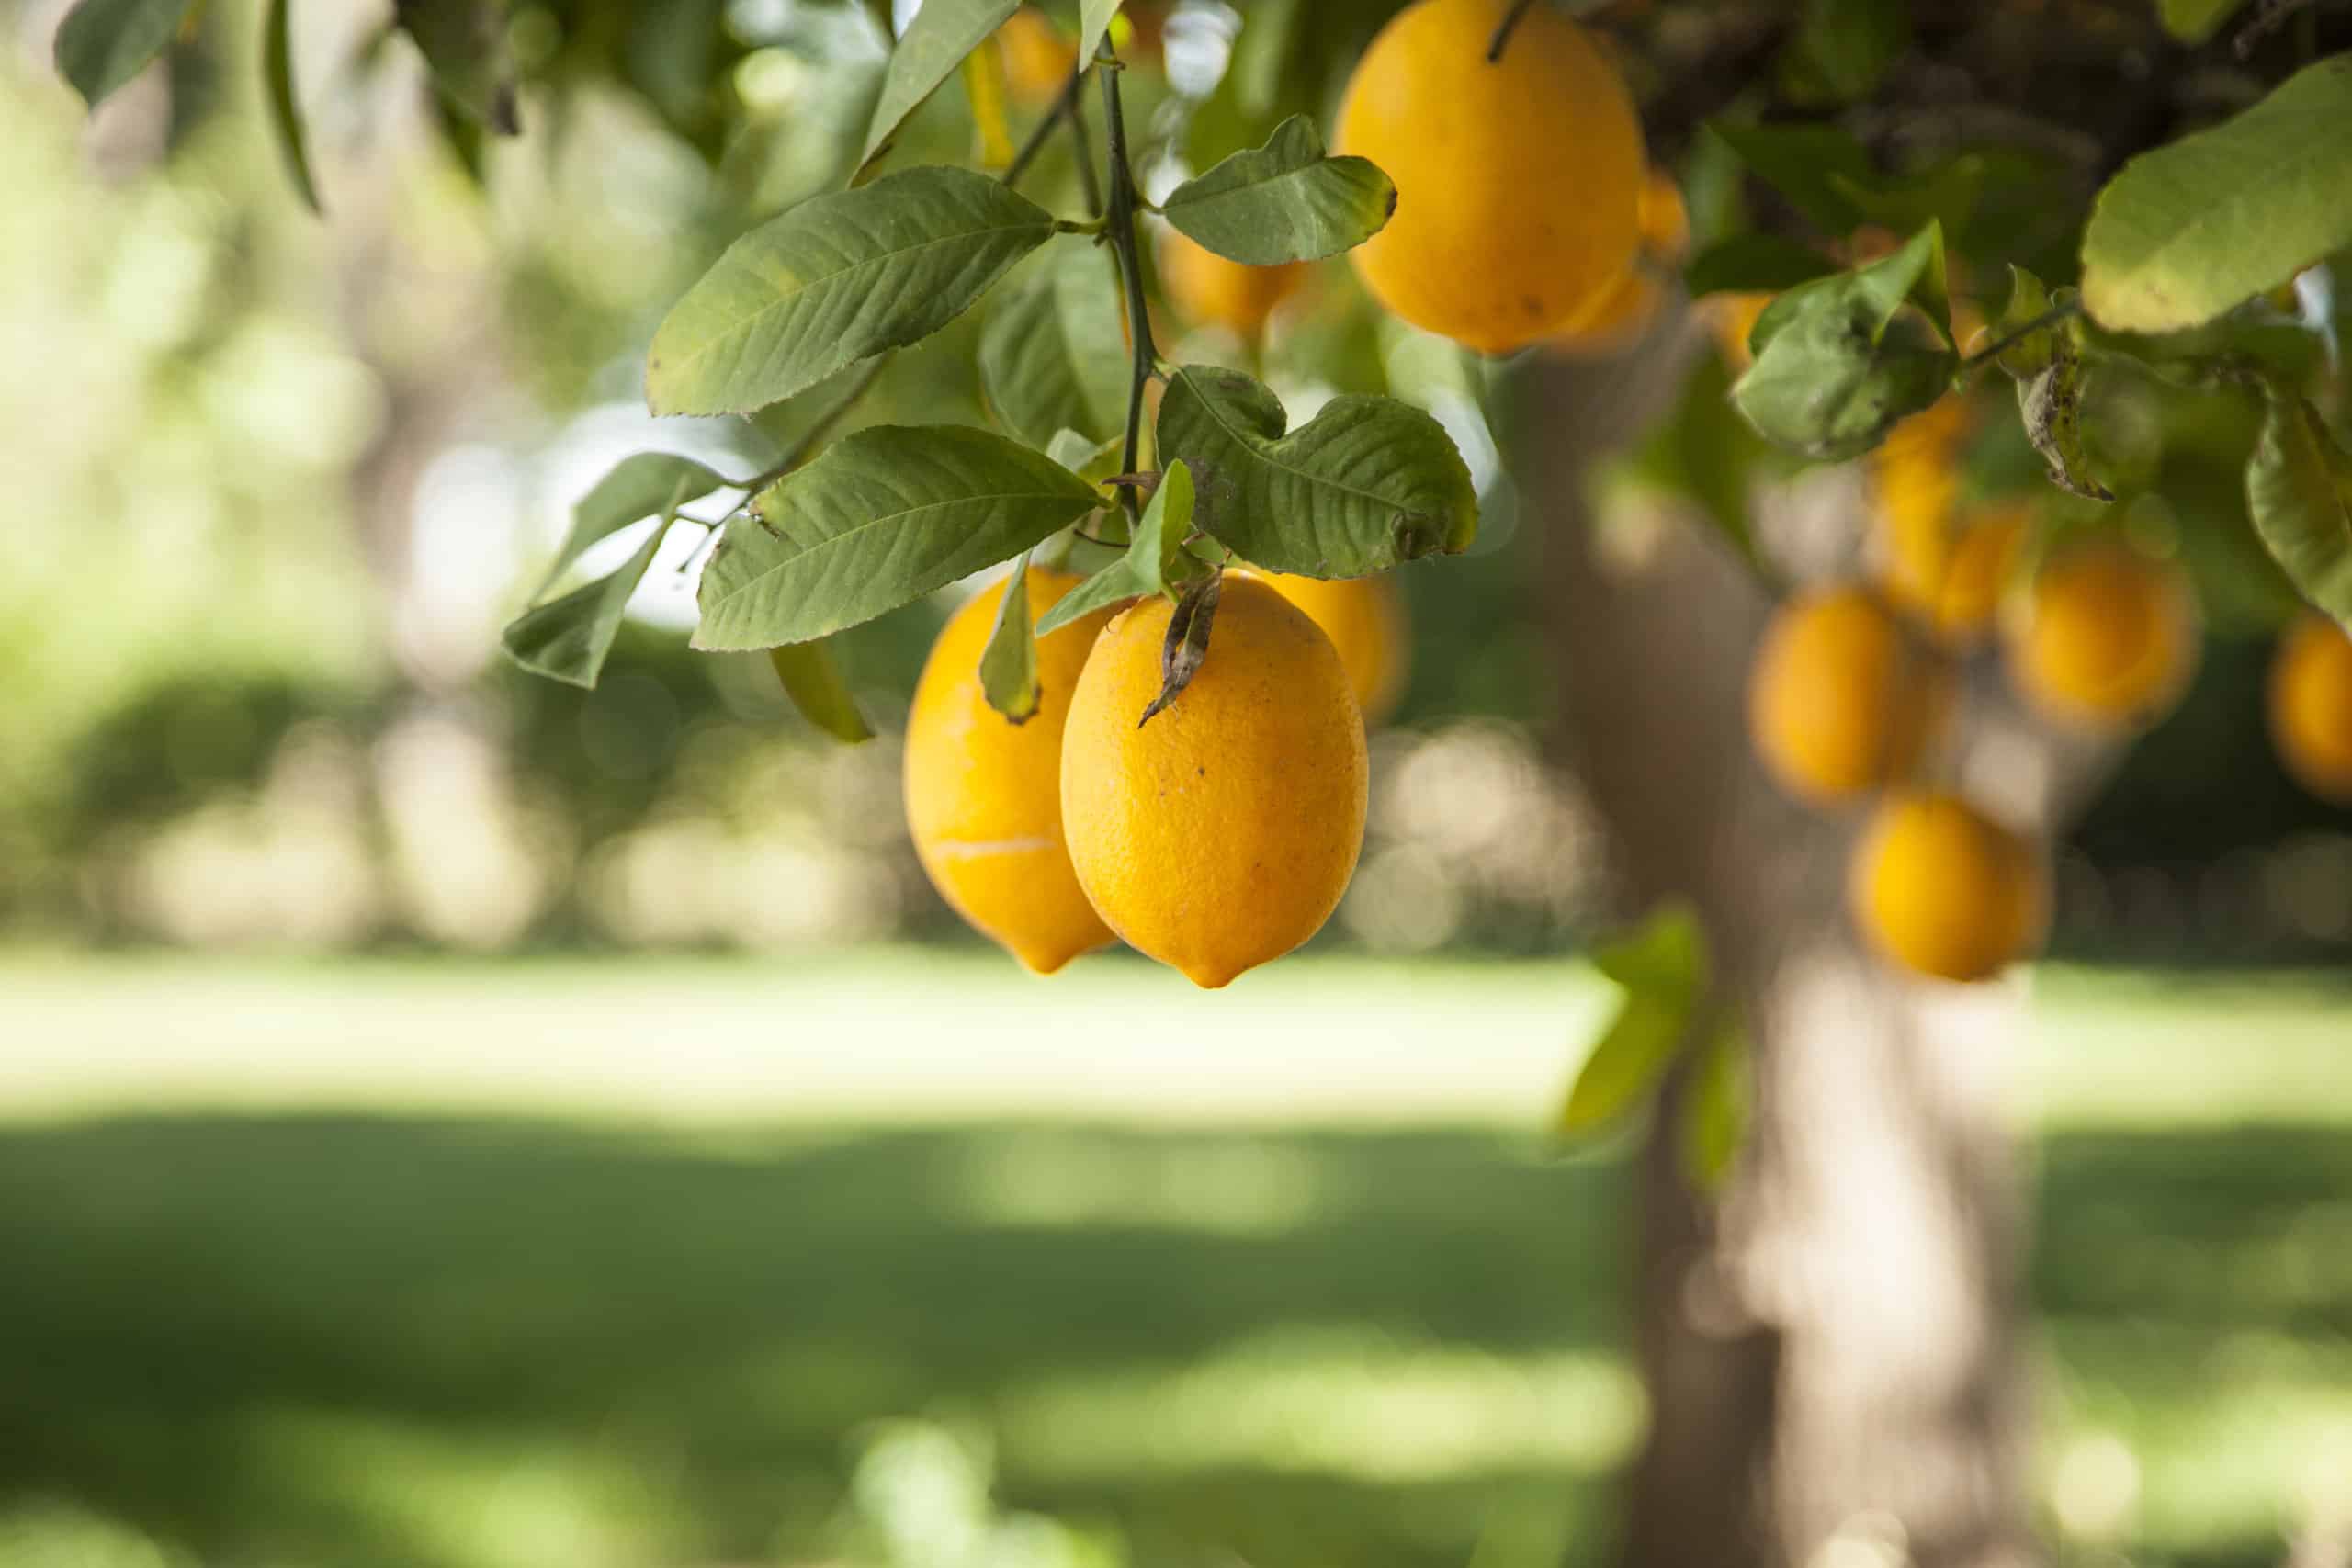 Ripe Meyer lemons hanging from a tree with bright green leaves.